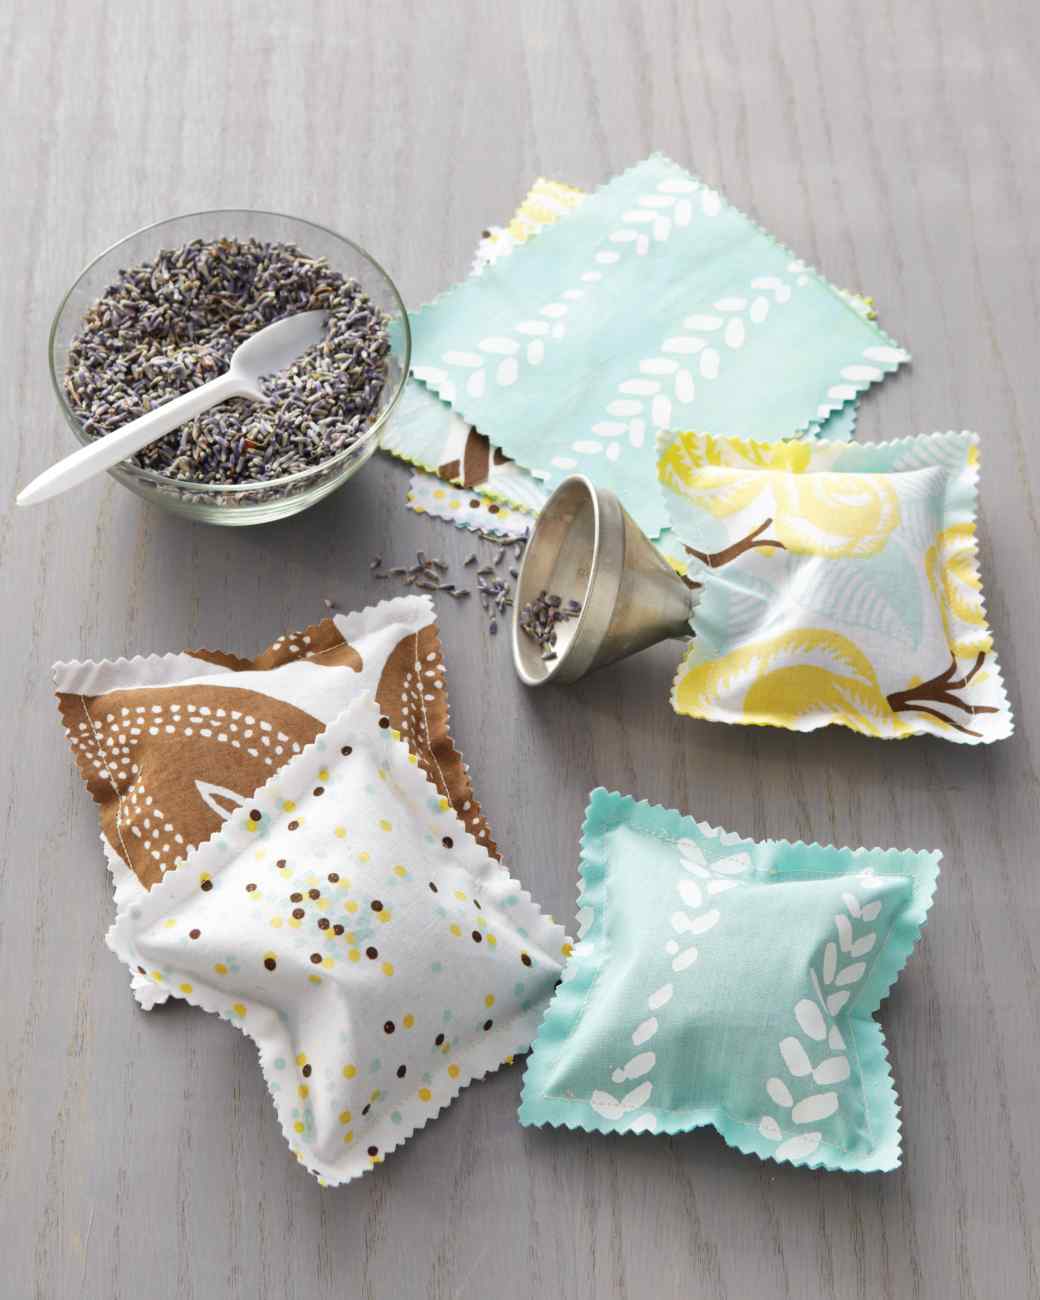 Scented sachets diy